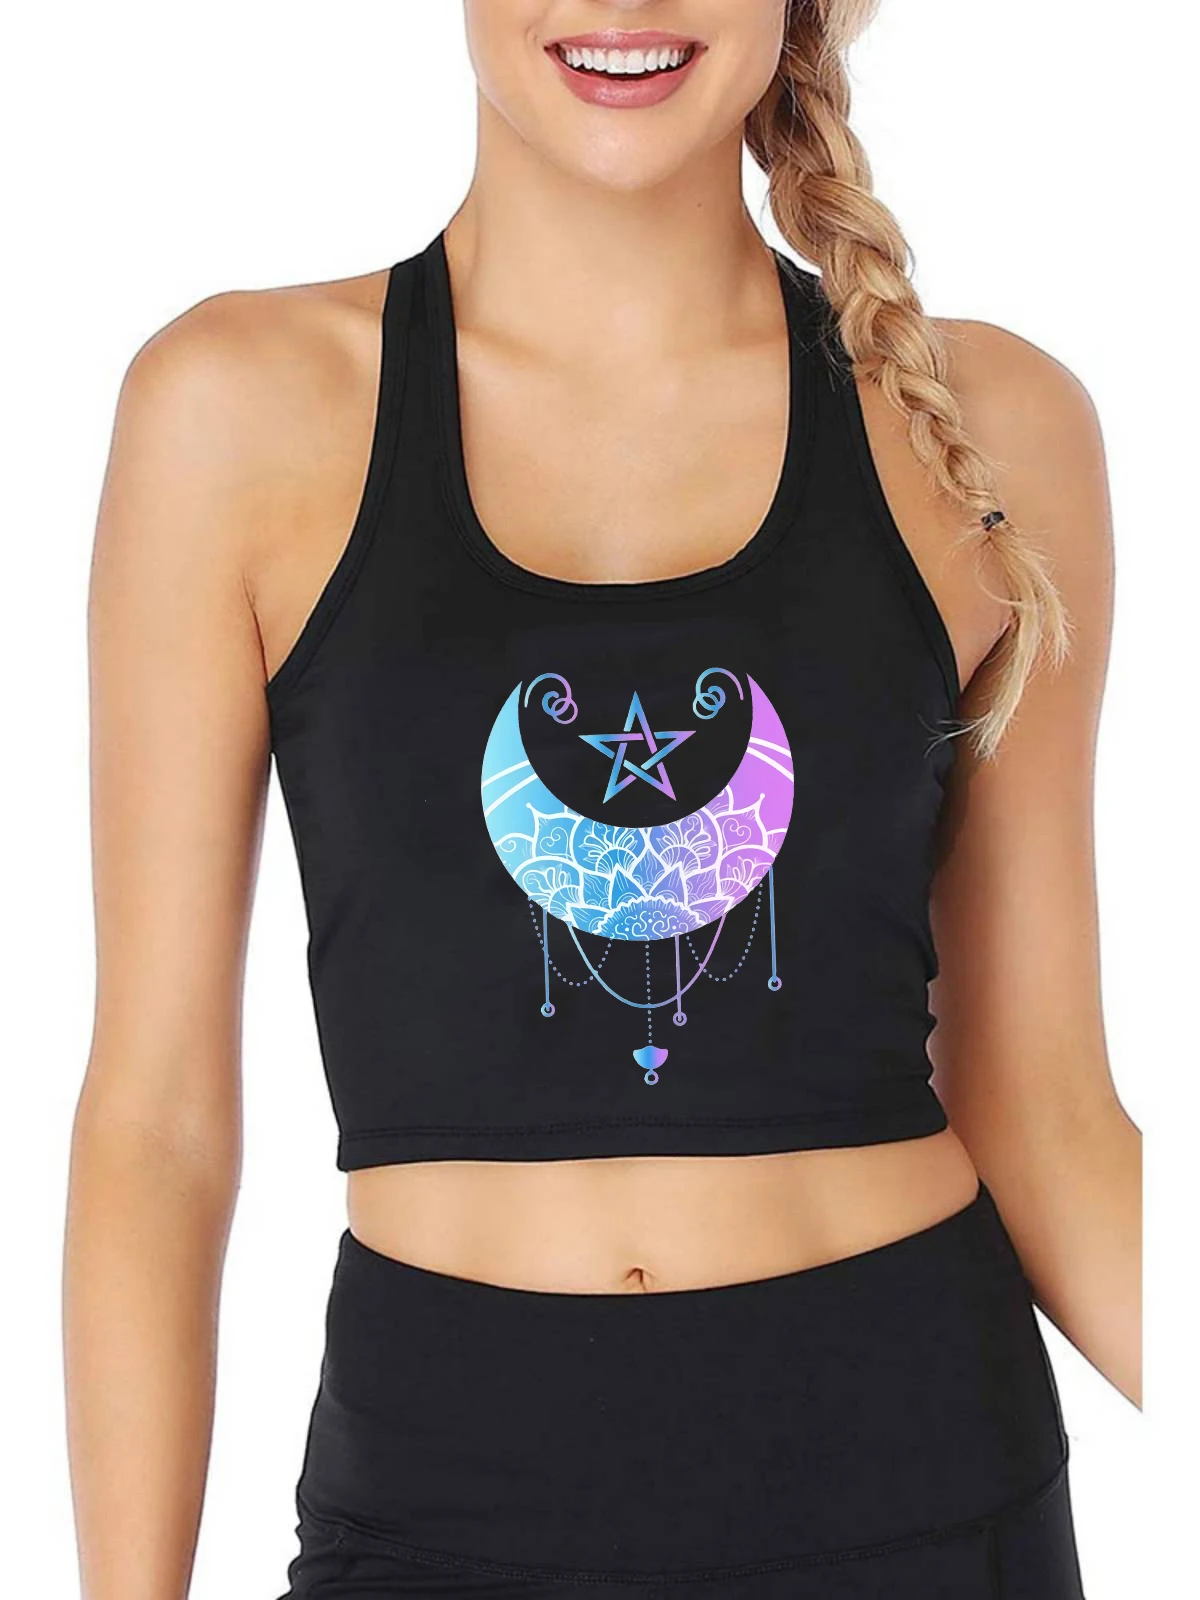 

Pastel Goth Moon Gothic Crop Top Women's Satan Crescent Witchy Design Tank Tops Sexy Slim Fit Camisole